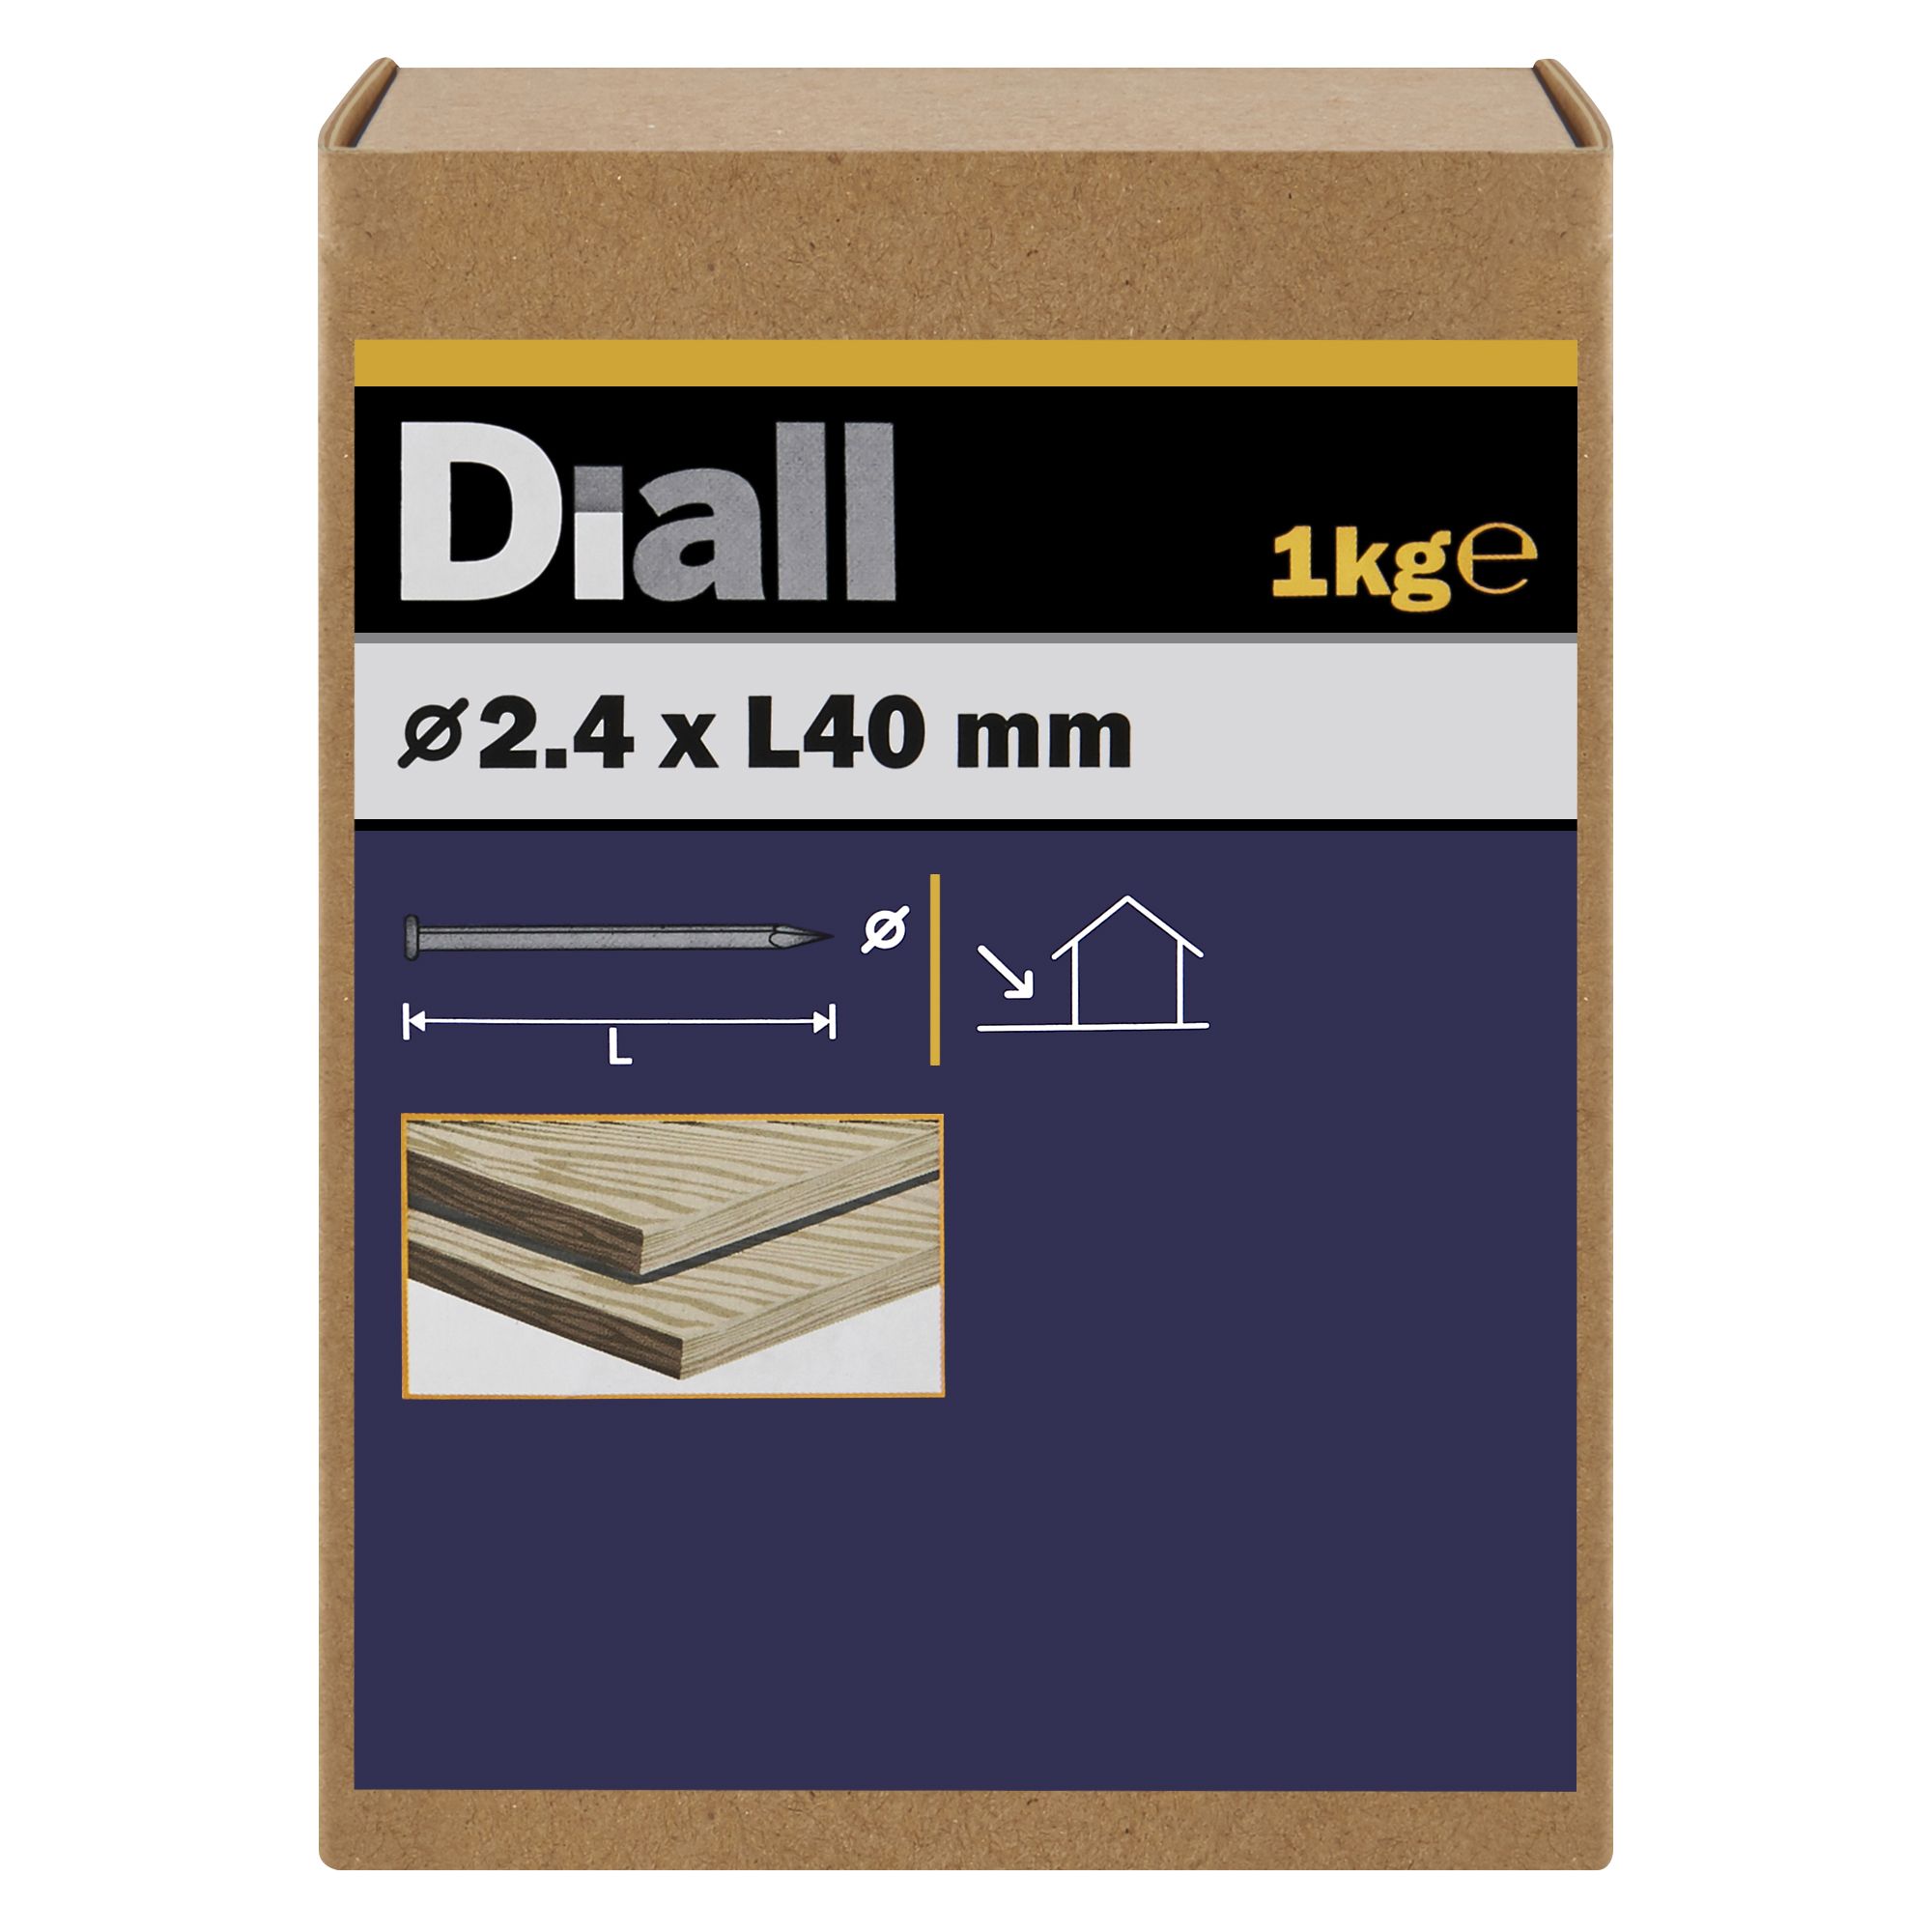 Diall Galvanised Round wire nail (L)40mm (Dia)2.4mm 1kg